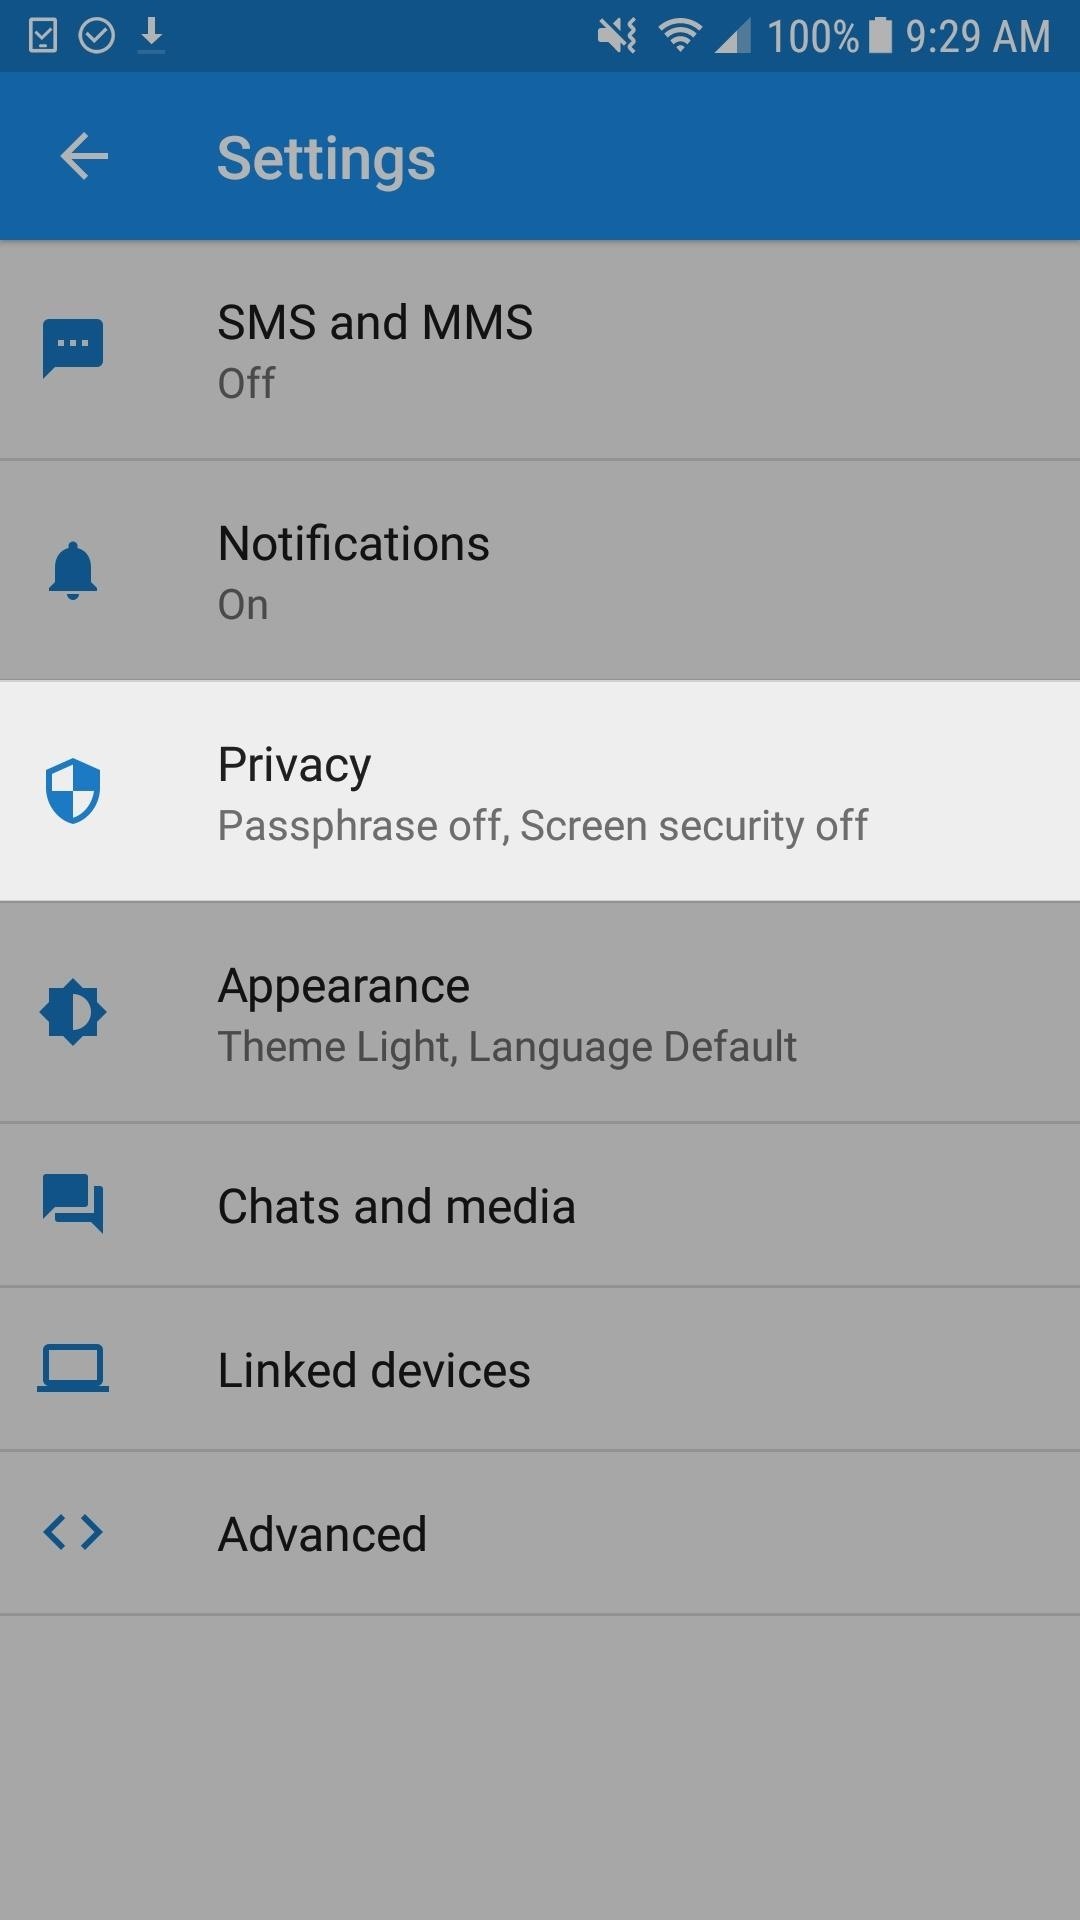 Signal 101: How to Password-Protect Your Calls, Texts & Notification Previews